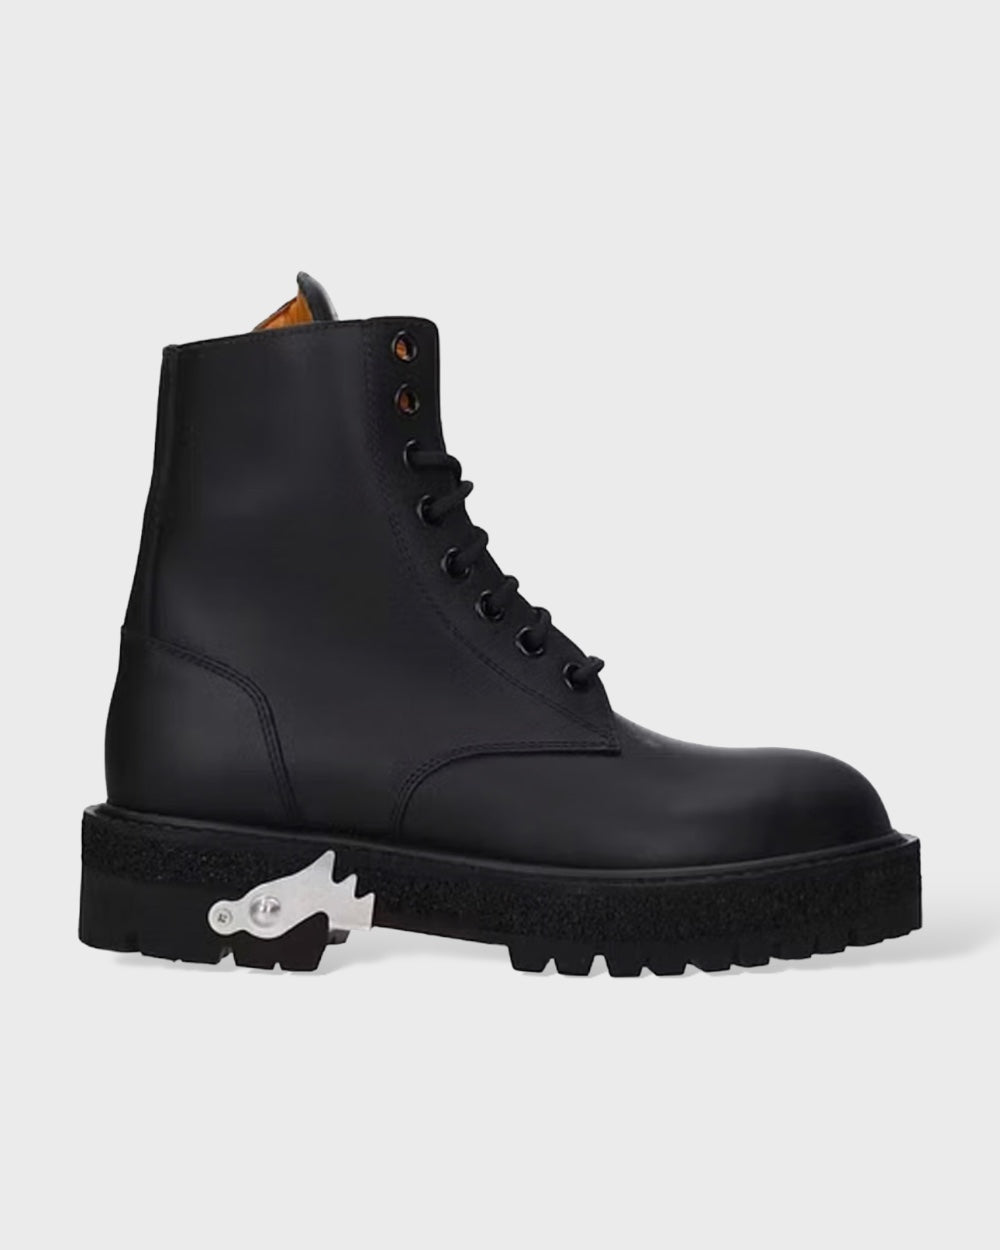 Off-White Black Leather Boot